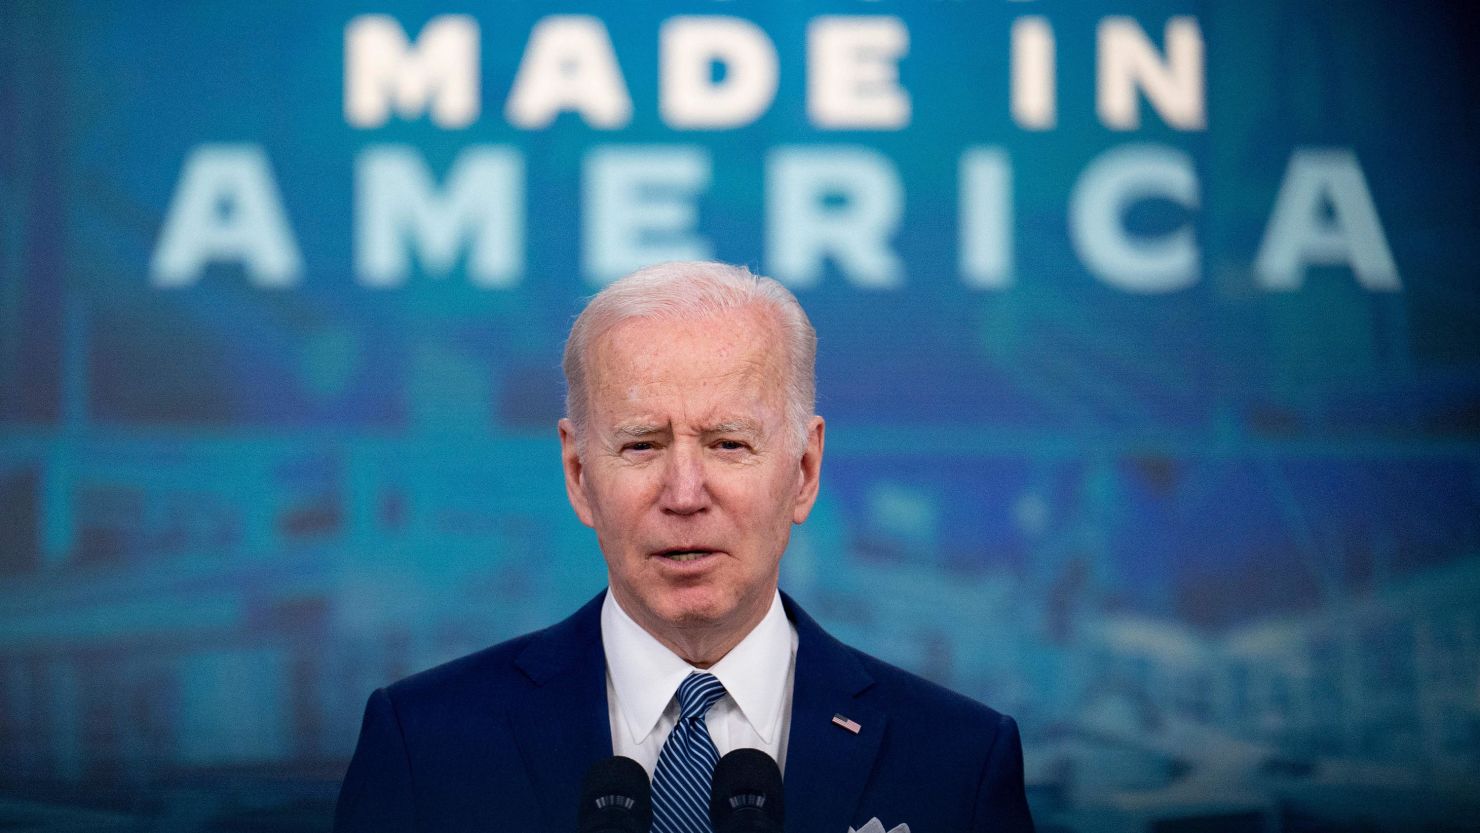 US President Joe Biden speaks about his Made in America commitments, from the South Court Auditorium of the White House in Washington, DC, on March 4, 2022. 